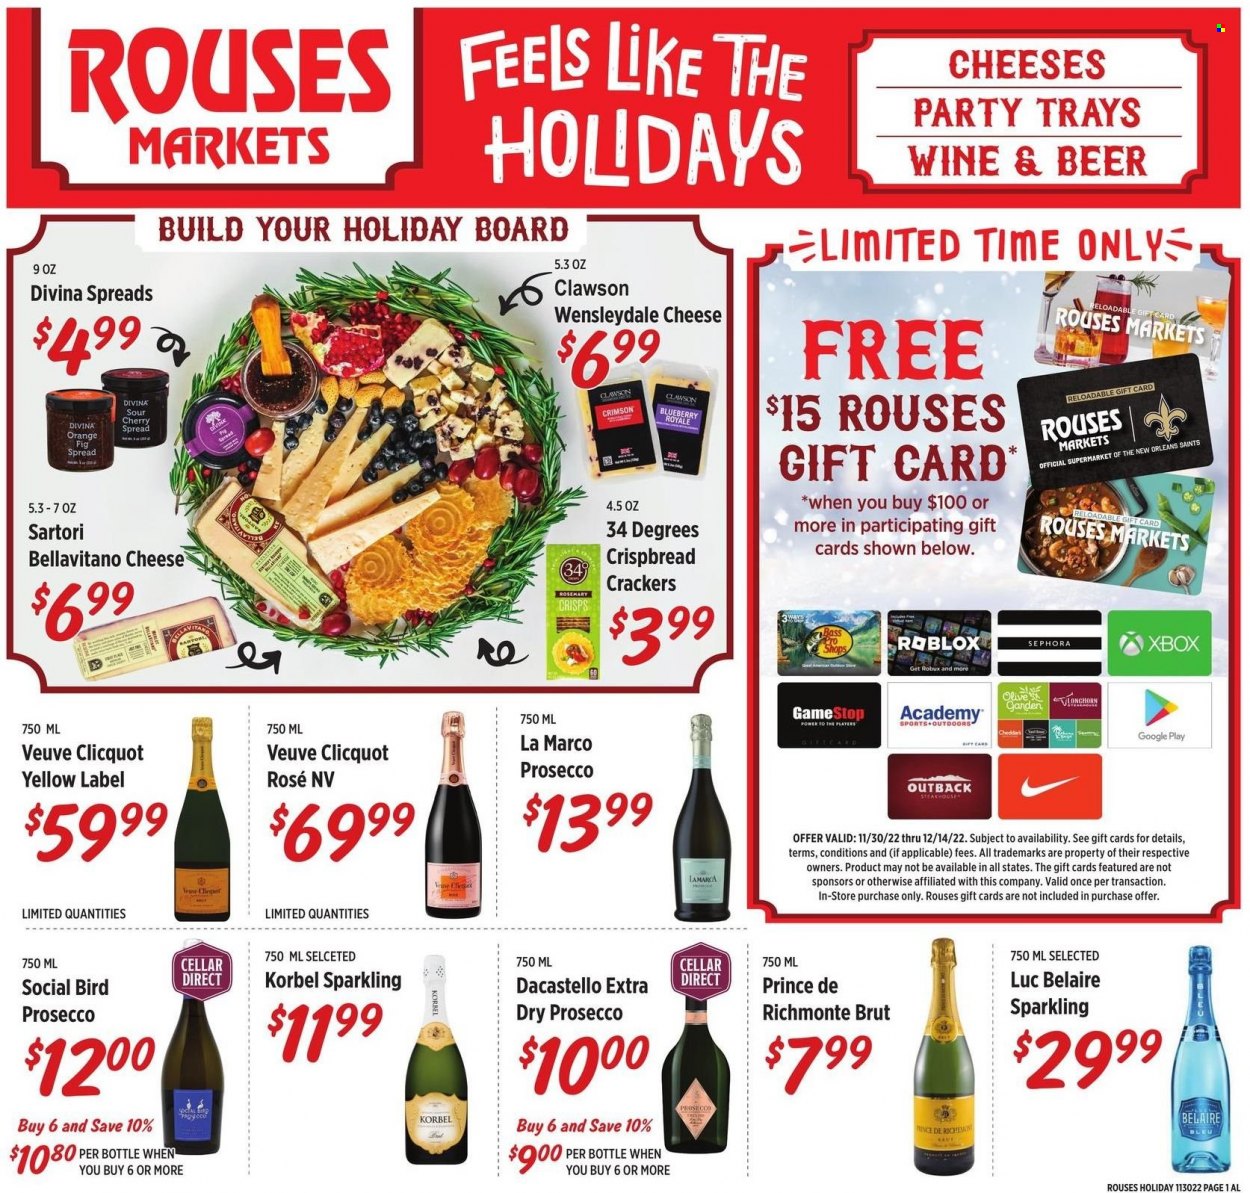 thumbnail - Rouses Markets Flyer - 11/30/2022 - 12/07/2022 - Sales products - crispbread, cherries, oranges, Longhorn cheese, Wensleydale, cheese, BellaVitano, crackers, rosemary, prosecco, wine, Veuve Clicquot, rosé wine, beer, Brut. Page 4.